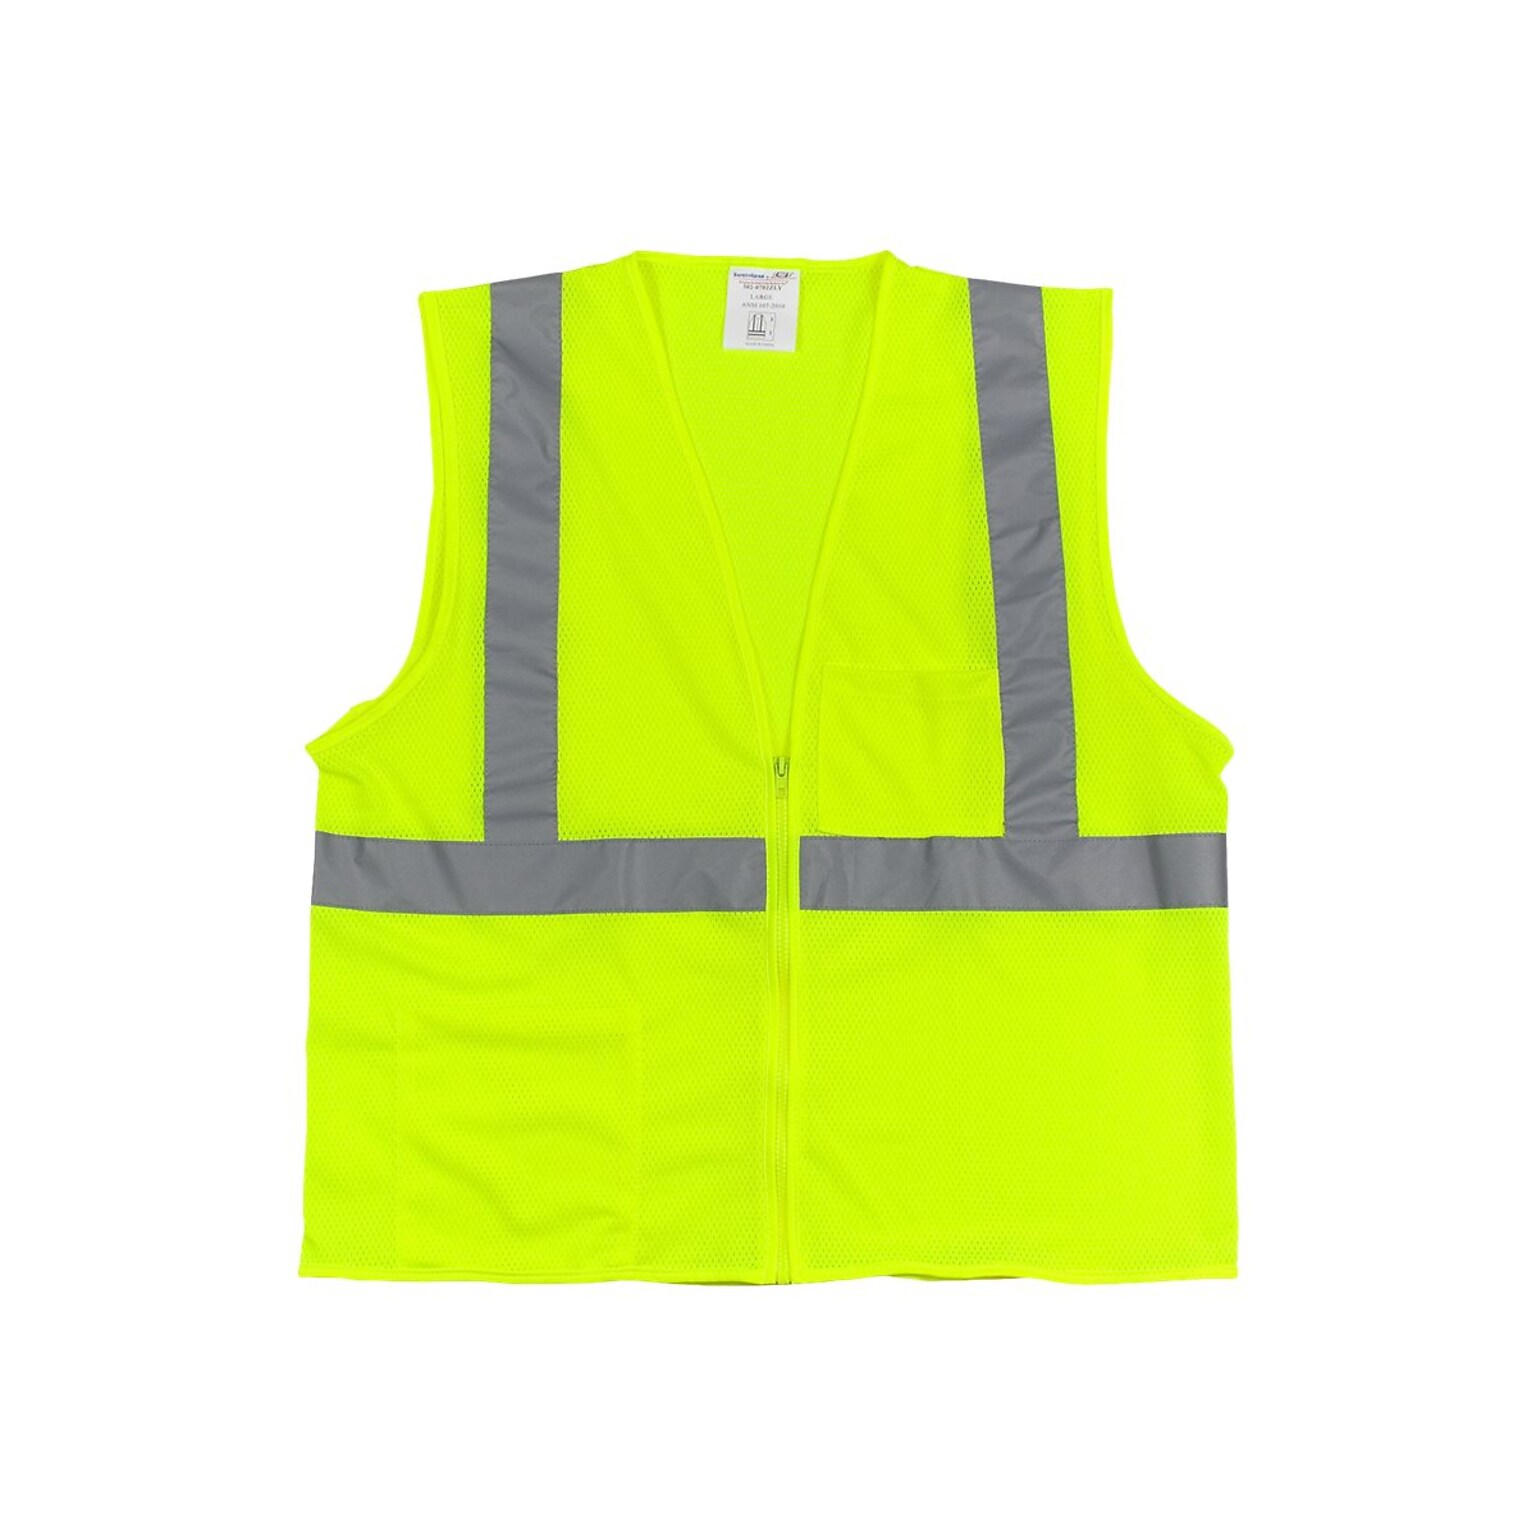 Protective Industrial Products High Visibility Zipper Safety Vest, ANSI Class R2, Lime Yellow, 2XL (302-0702Z-LY/2X)